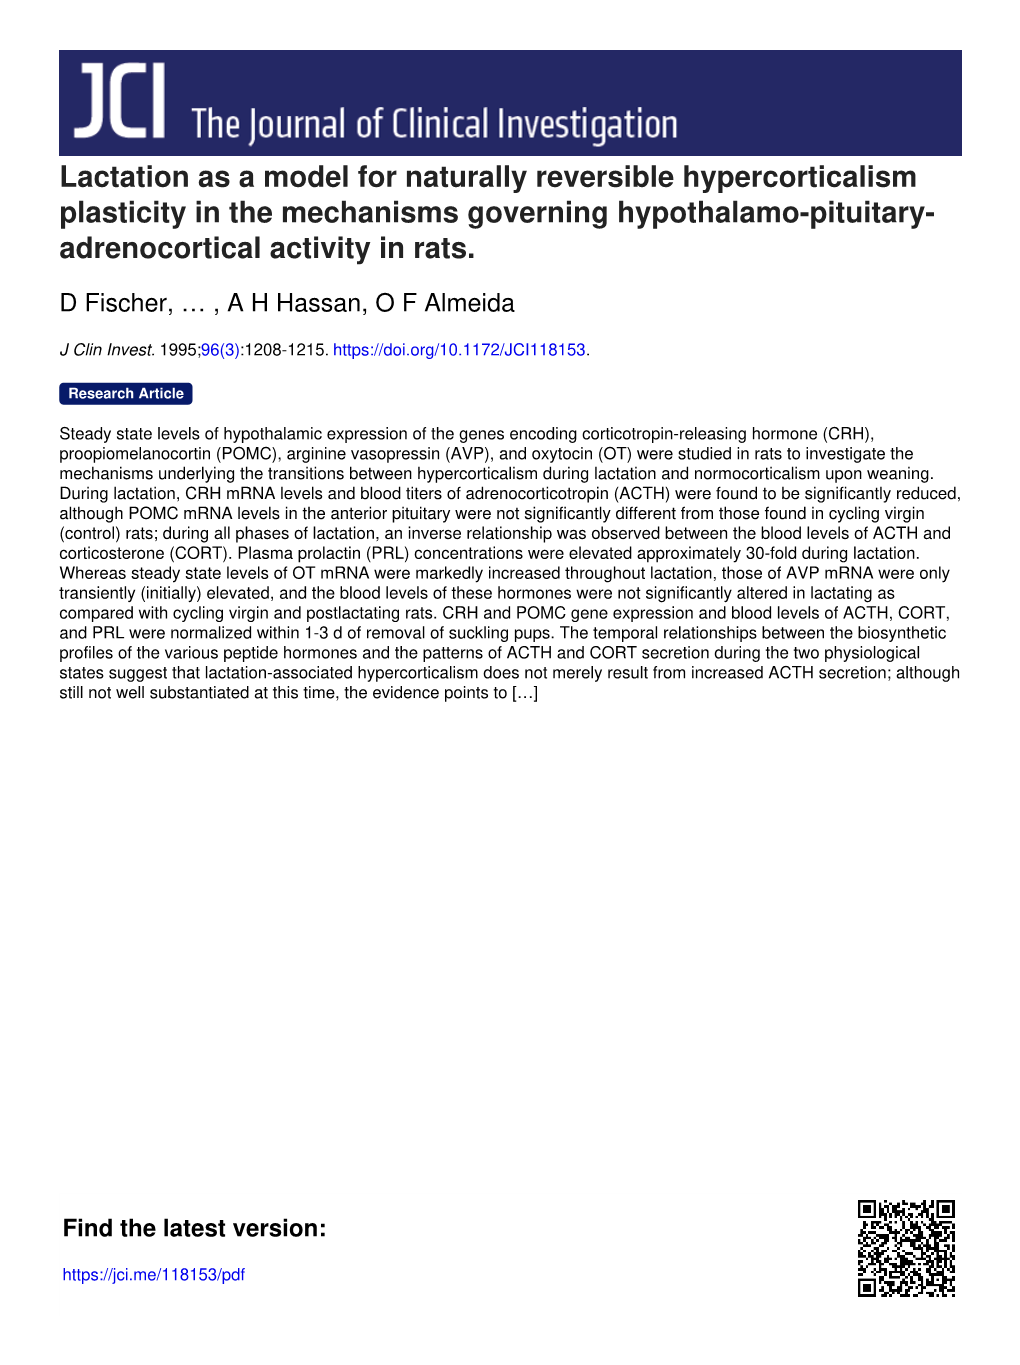 Lactation As a Model for Naturally Reversible Hypercorticalism Plasticity in the Mechanisms Governing Hypothalamo-Pituitary- Adrenocortical Activity in Rats